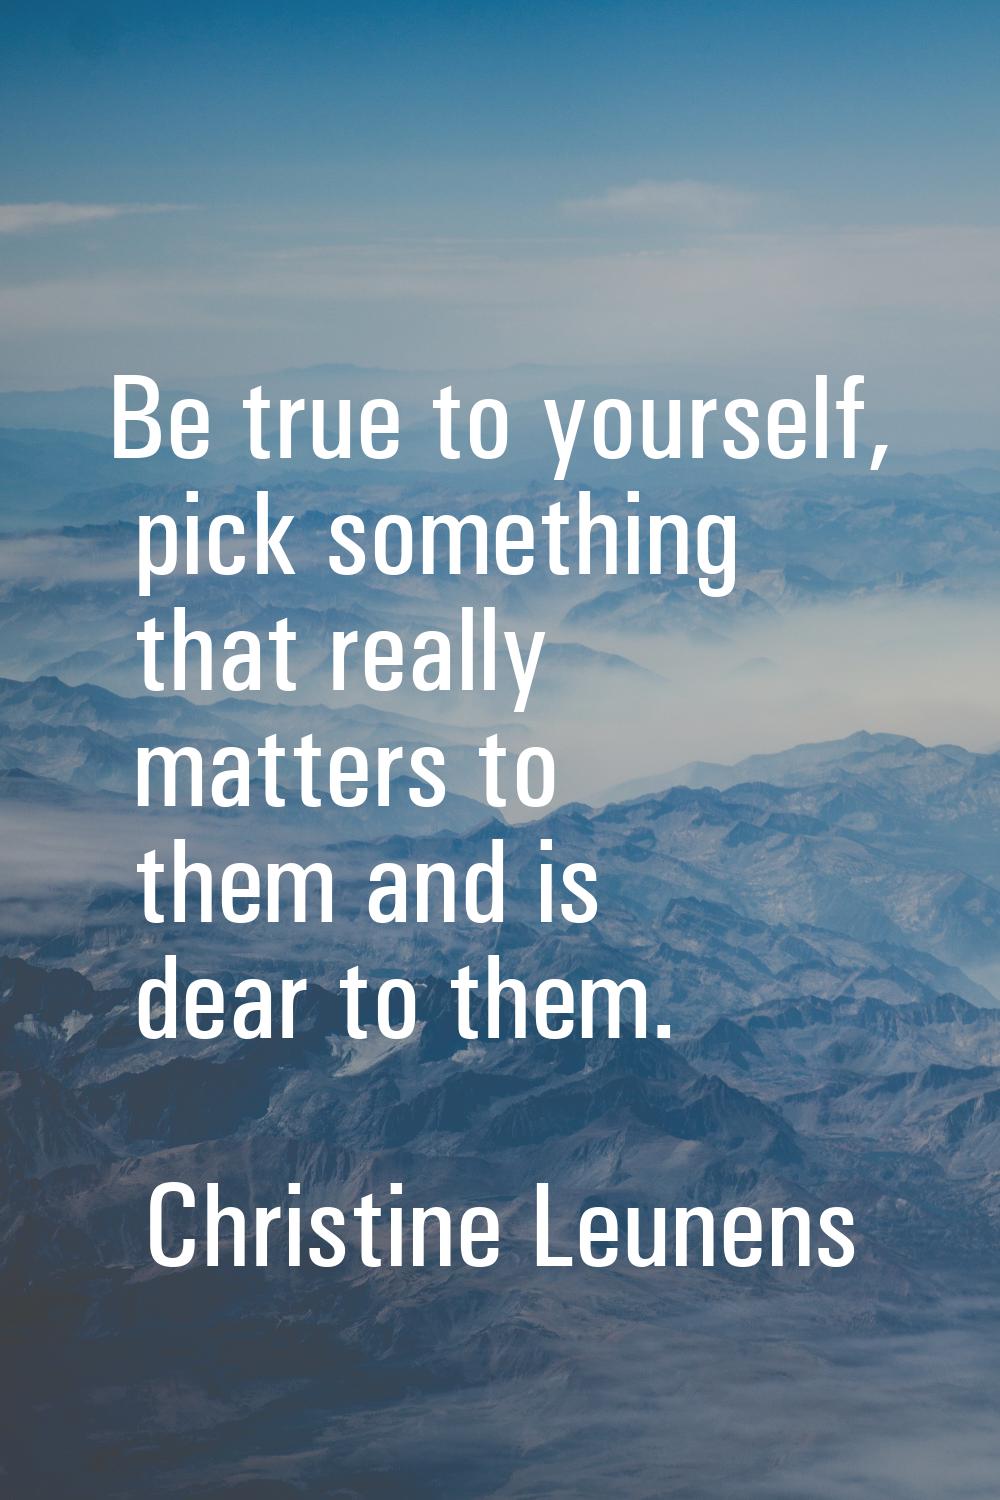 Be true to yourself, pick something that really matters to them and is dear to them.